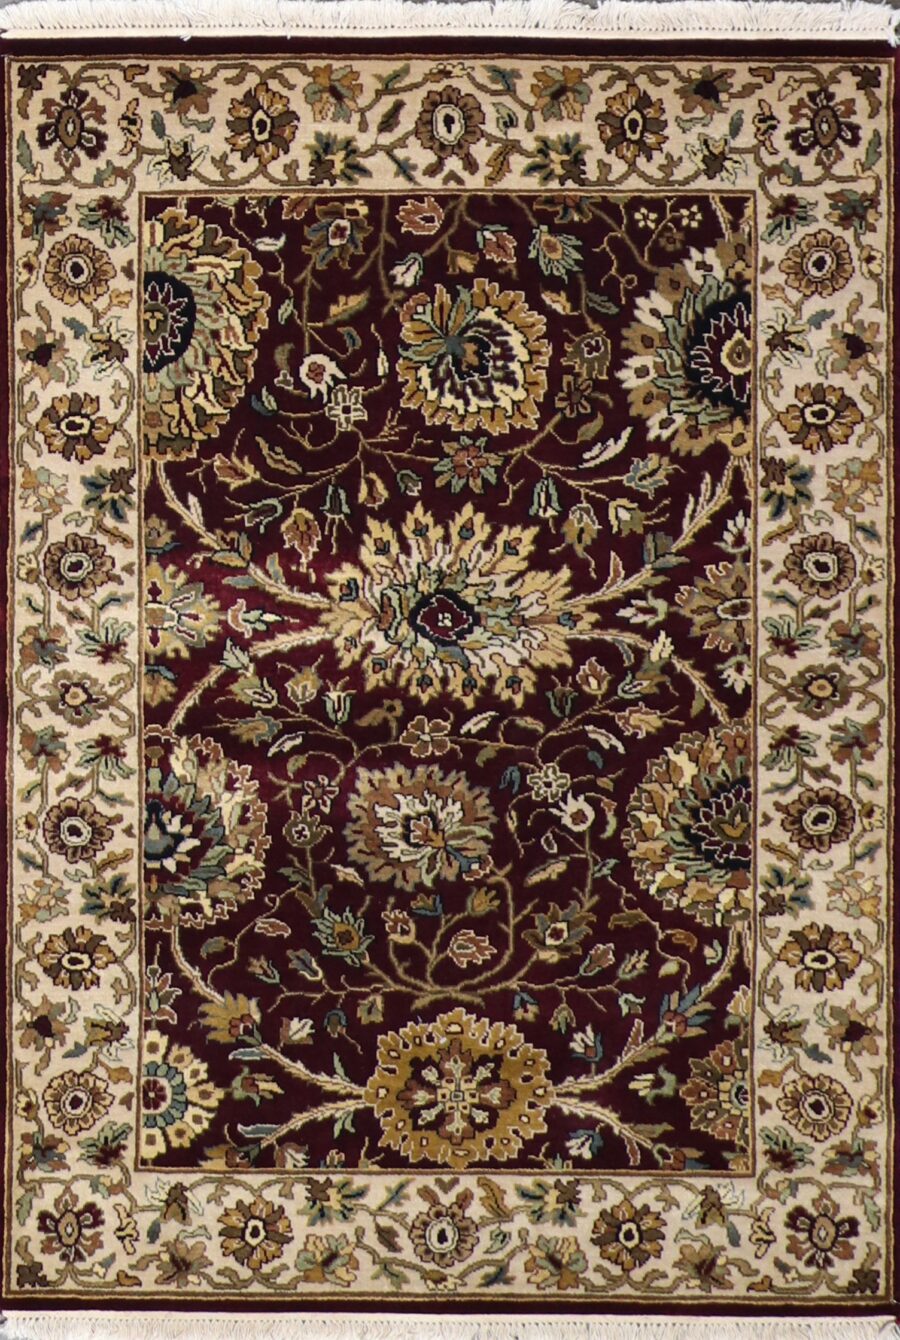 4'1"x6' Traditional Burgundy Wool Hand-Knotted Rug - Direct Rug Import | Rugs in Chicago, Indiana,South Bend,Granger